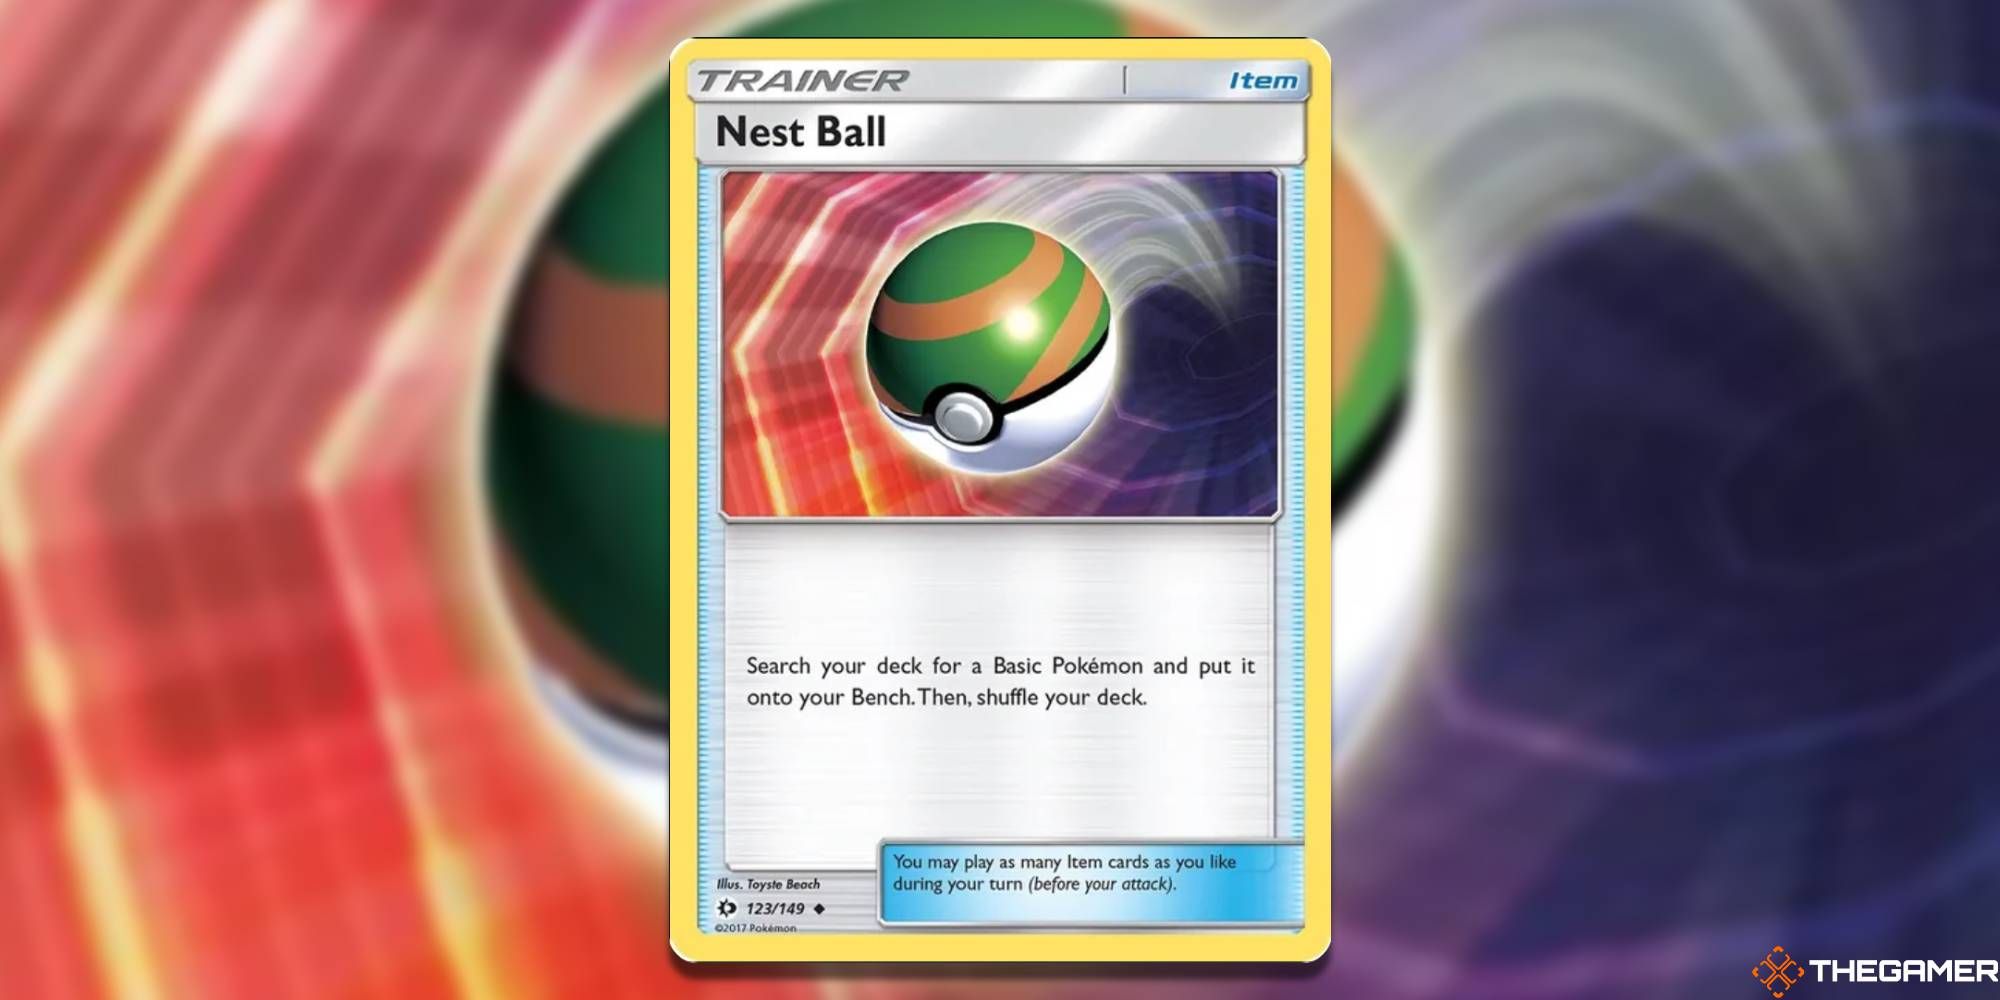 Nest Ball from the Pokemon TCG, with blurred background